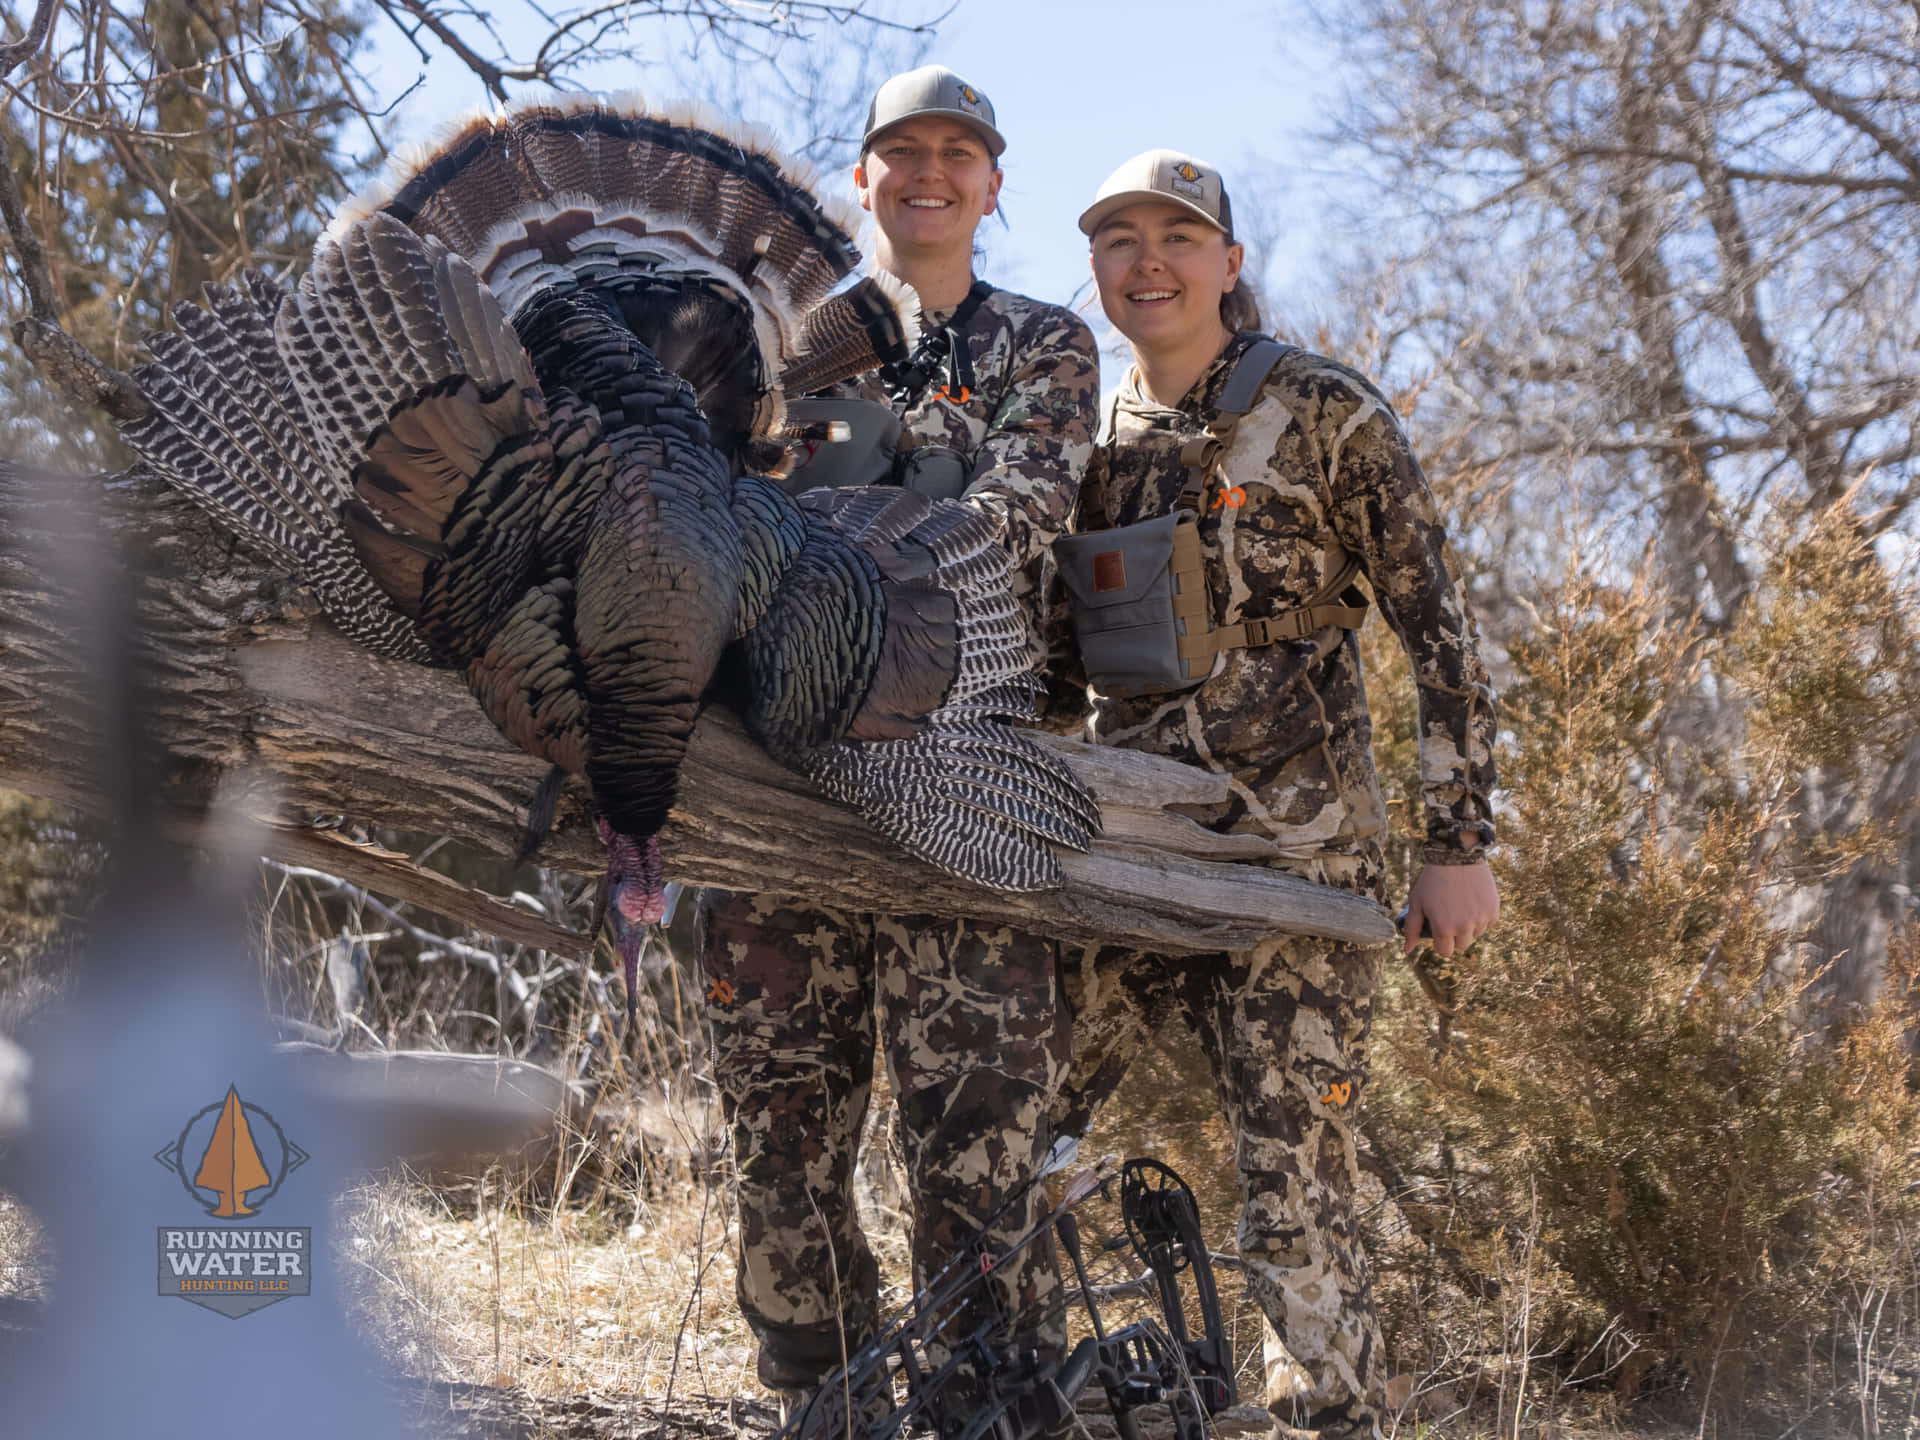 Two Hunters Pose With A Turkey Wallpaper